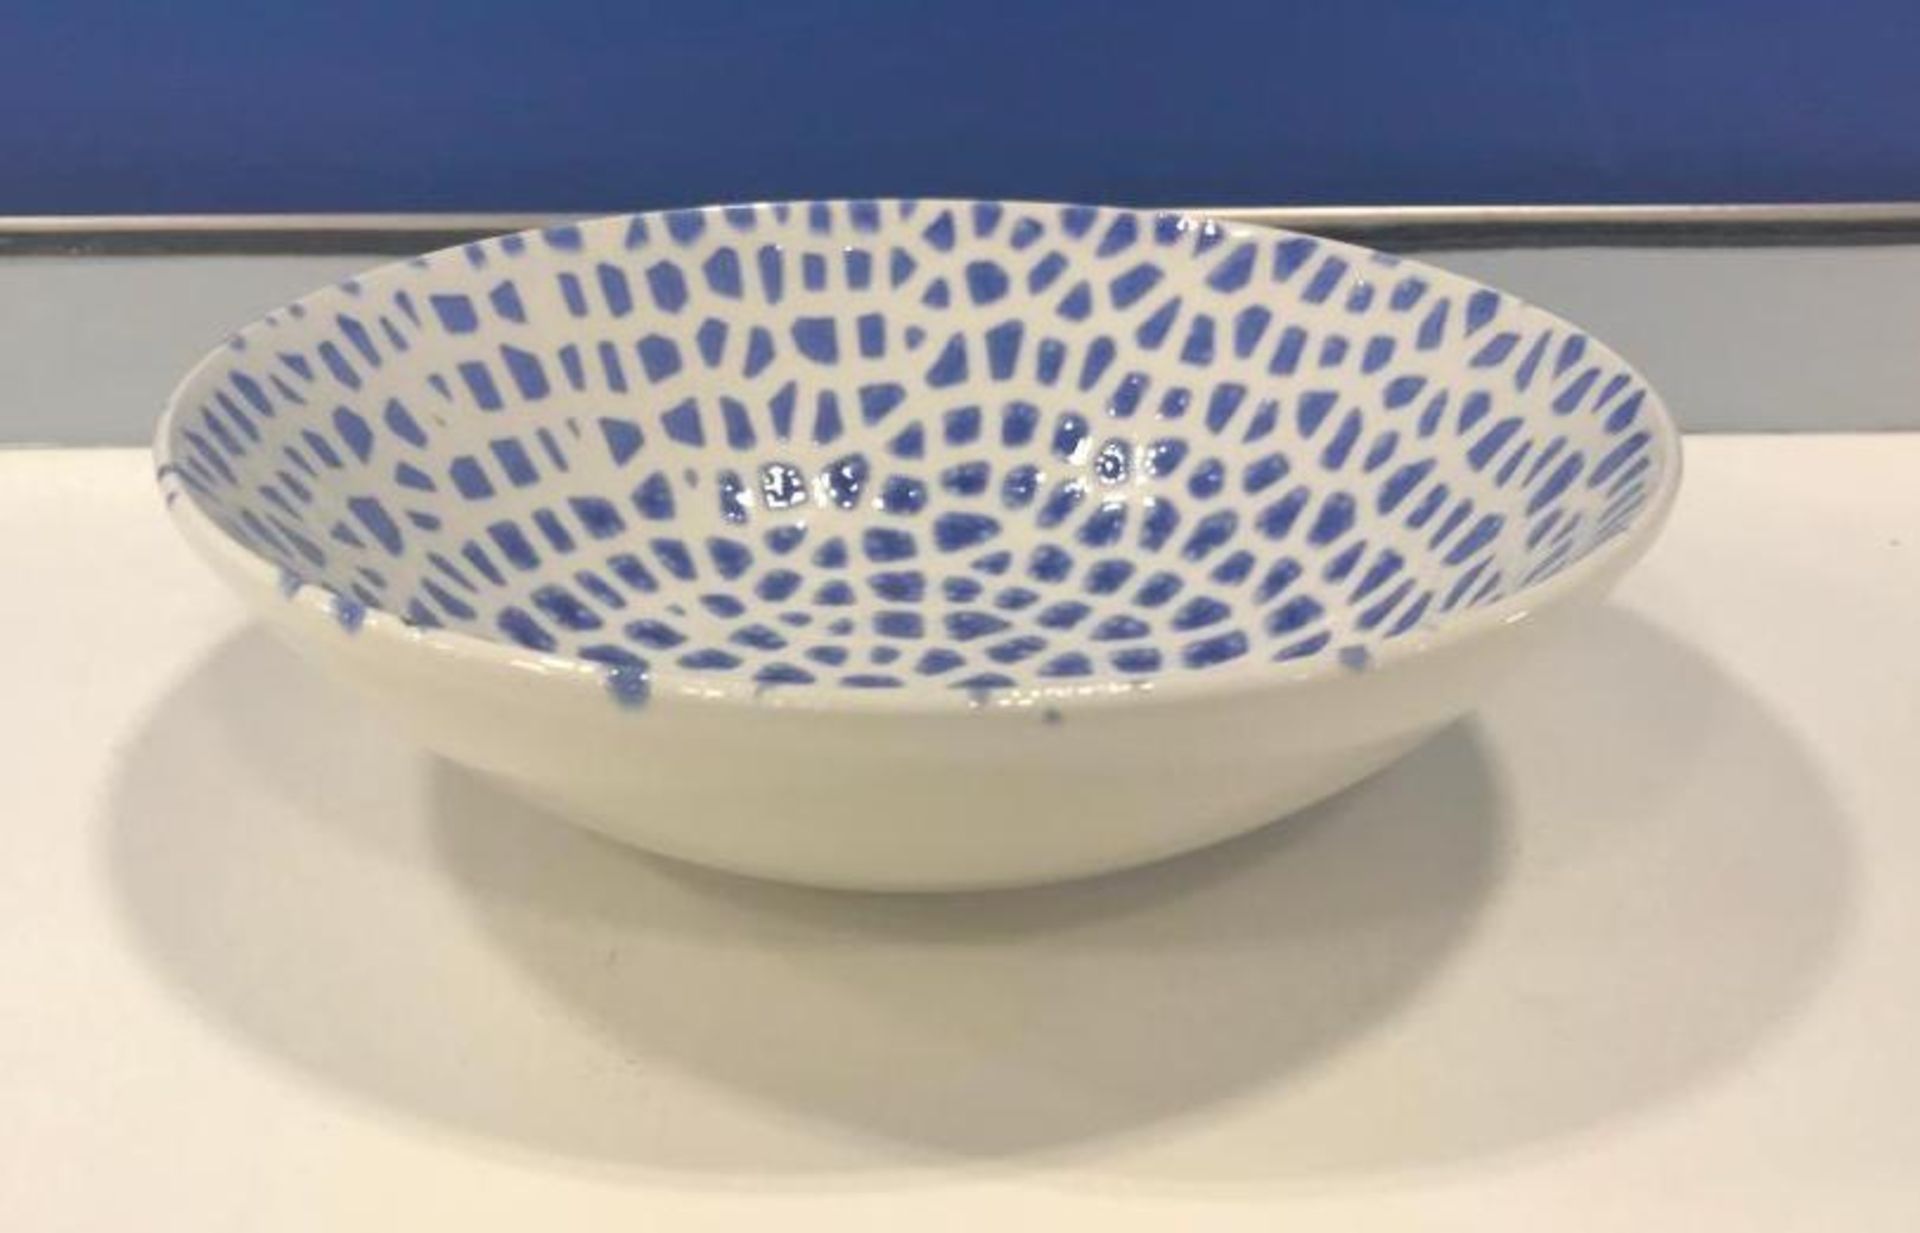 DUDSON MOSAIC BLUE CHEF'S BOWL 8" - 12/CASE, MADE IN ENGLAND - Image 2 of 5